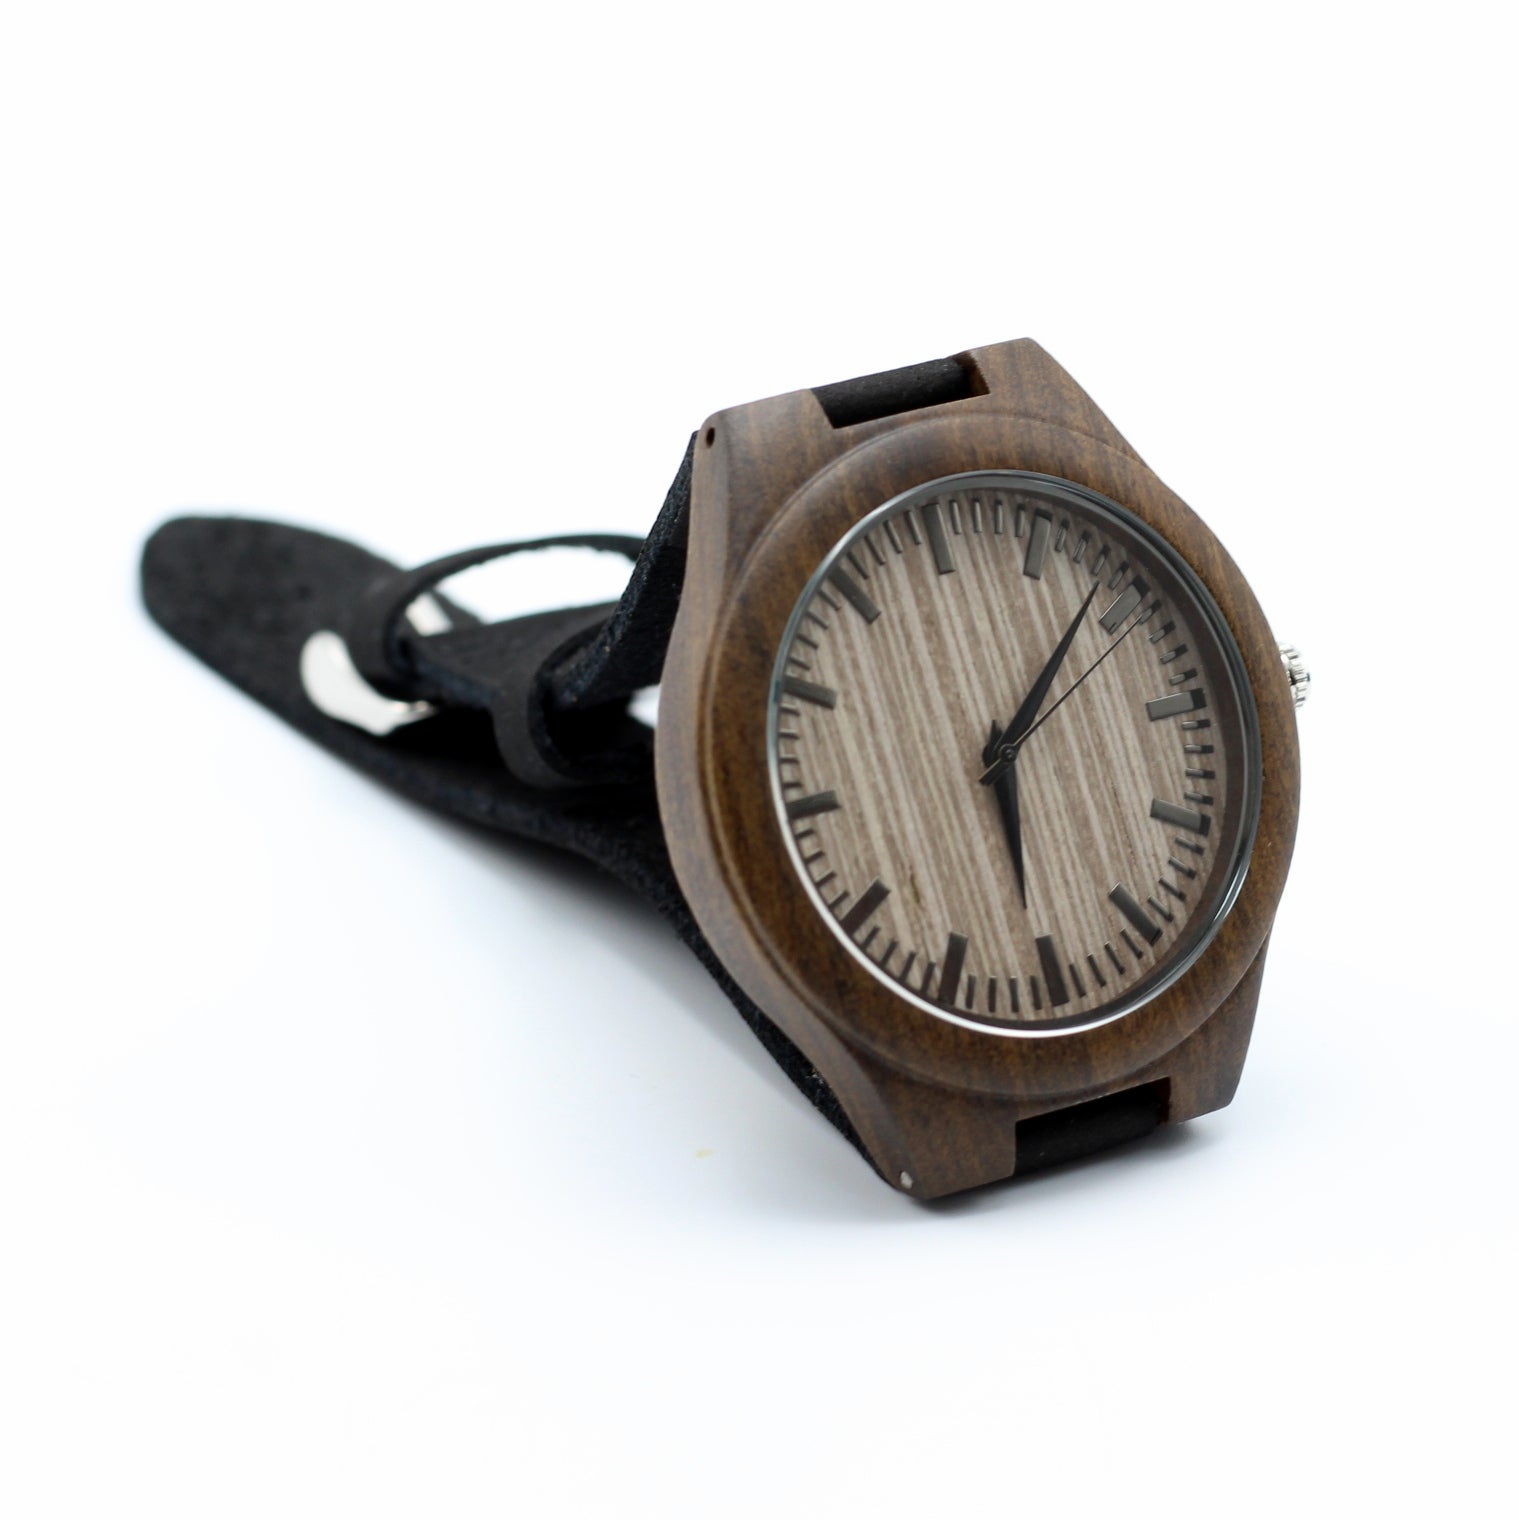 Men's walnut wooden watch with ash face and black leather strap, the Manly Strata, wooden watches, anniverysary gifts, south africa, Hashtag Bamboo.